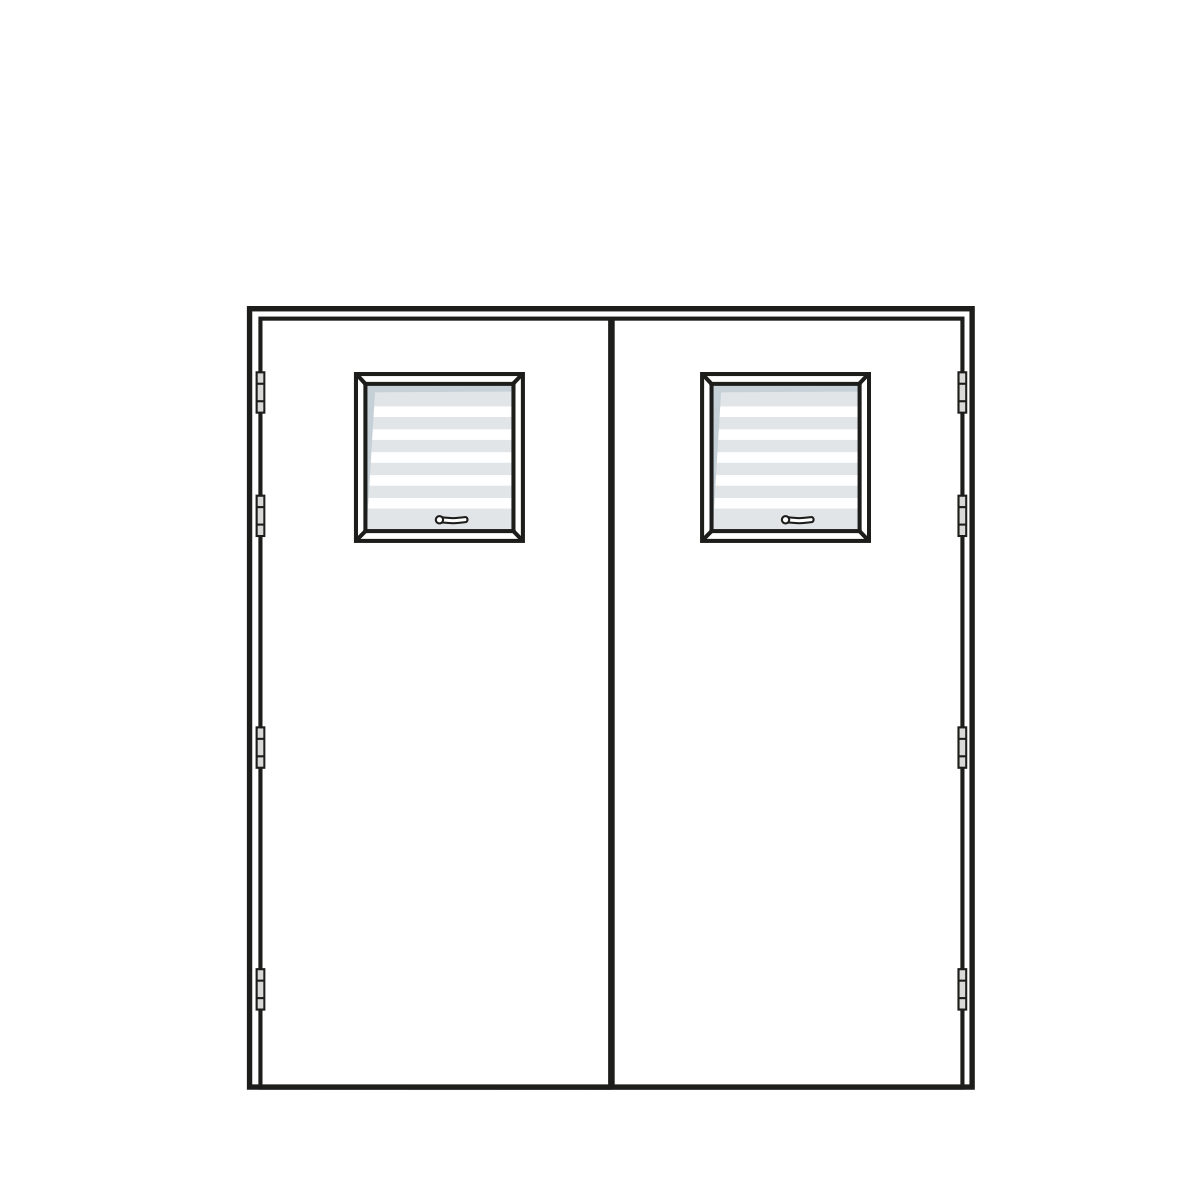 Door Configuration - Equal Pair Doorset with Privacy Vision Panel - Code EP-PV